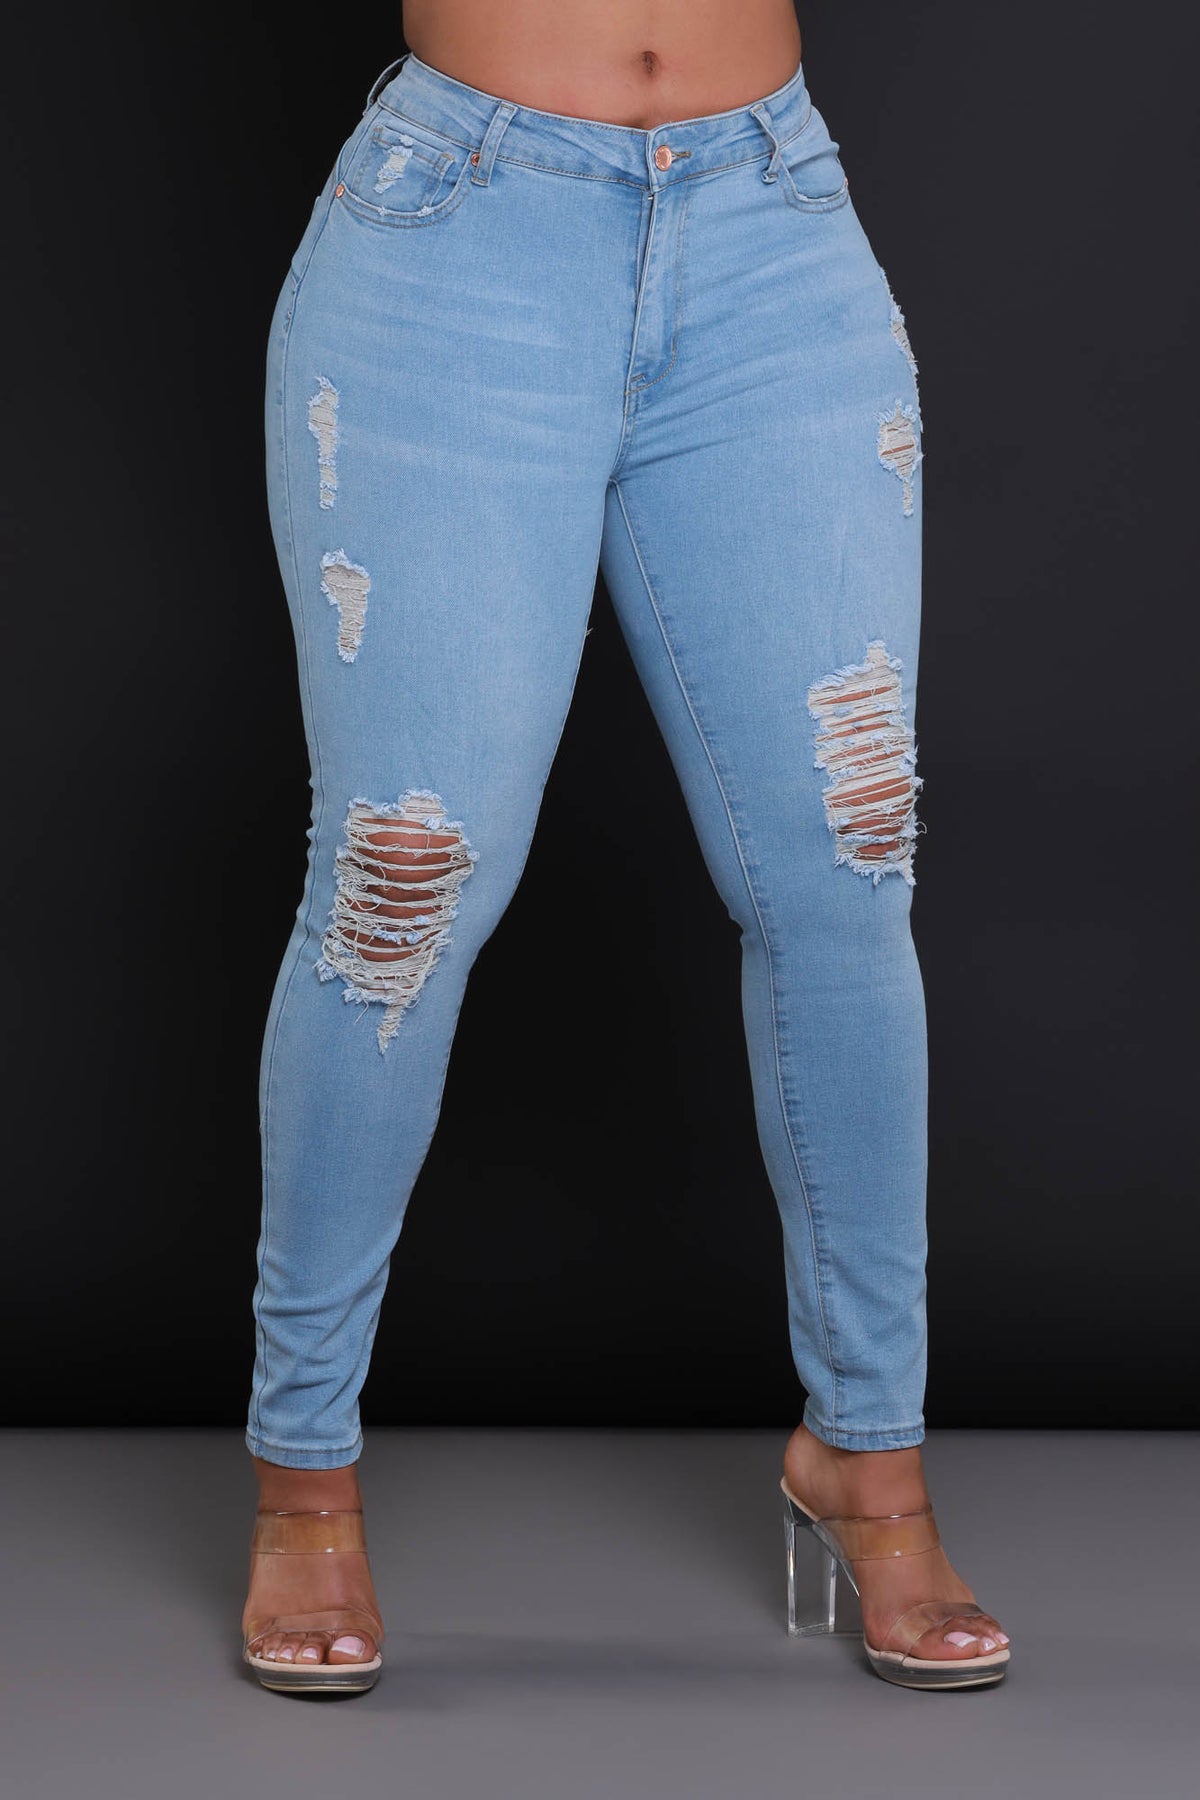 
              Heads Or Tails Hourglass Distressed Stretchy Jeans - Light Wash - Swank A Posh
            